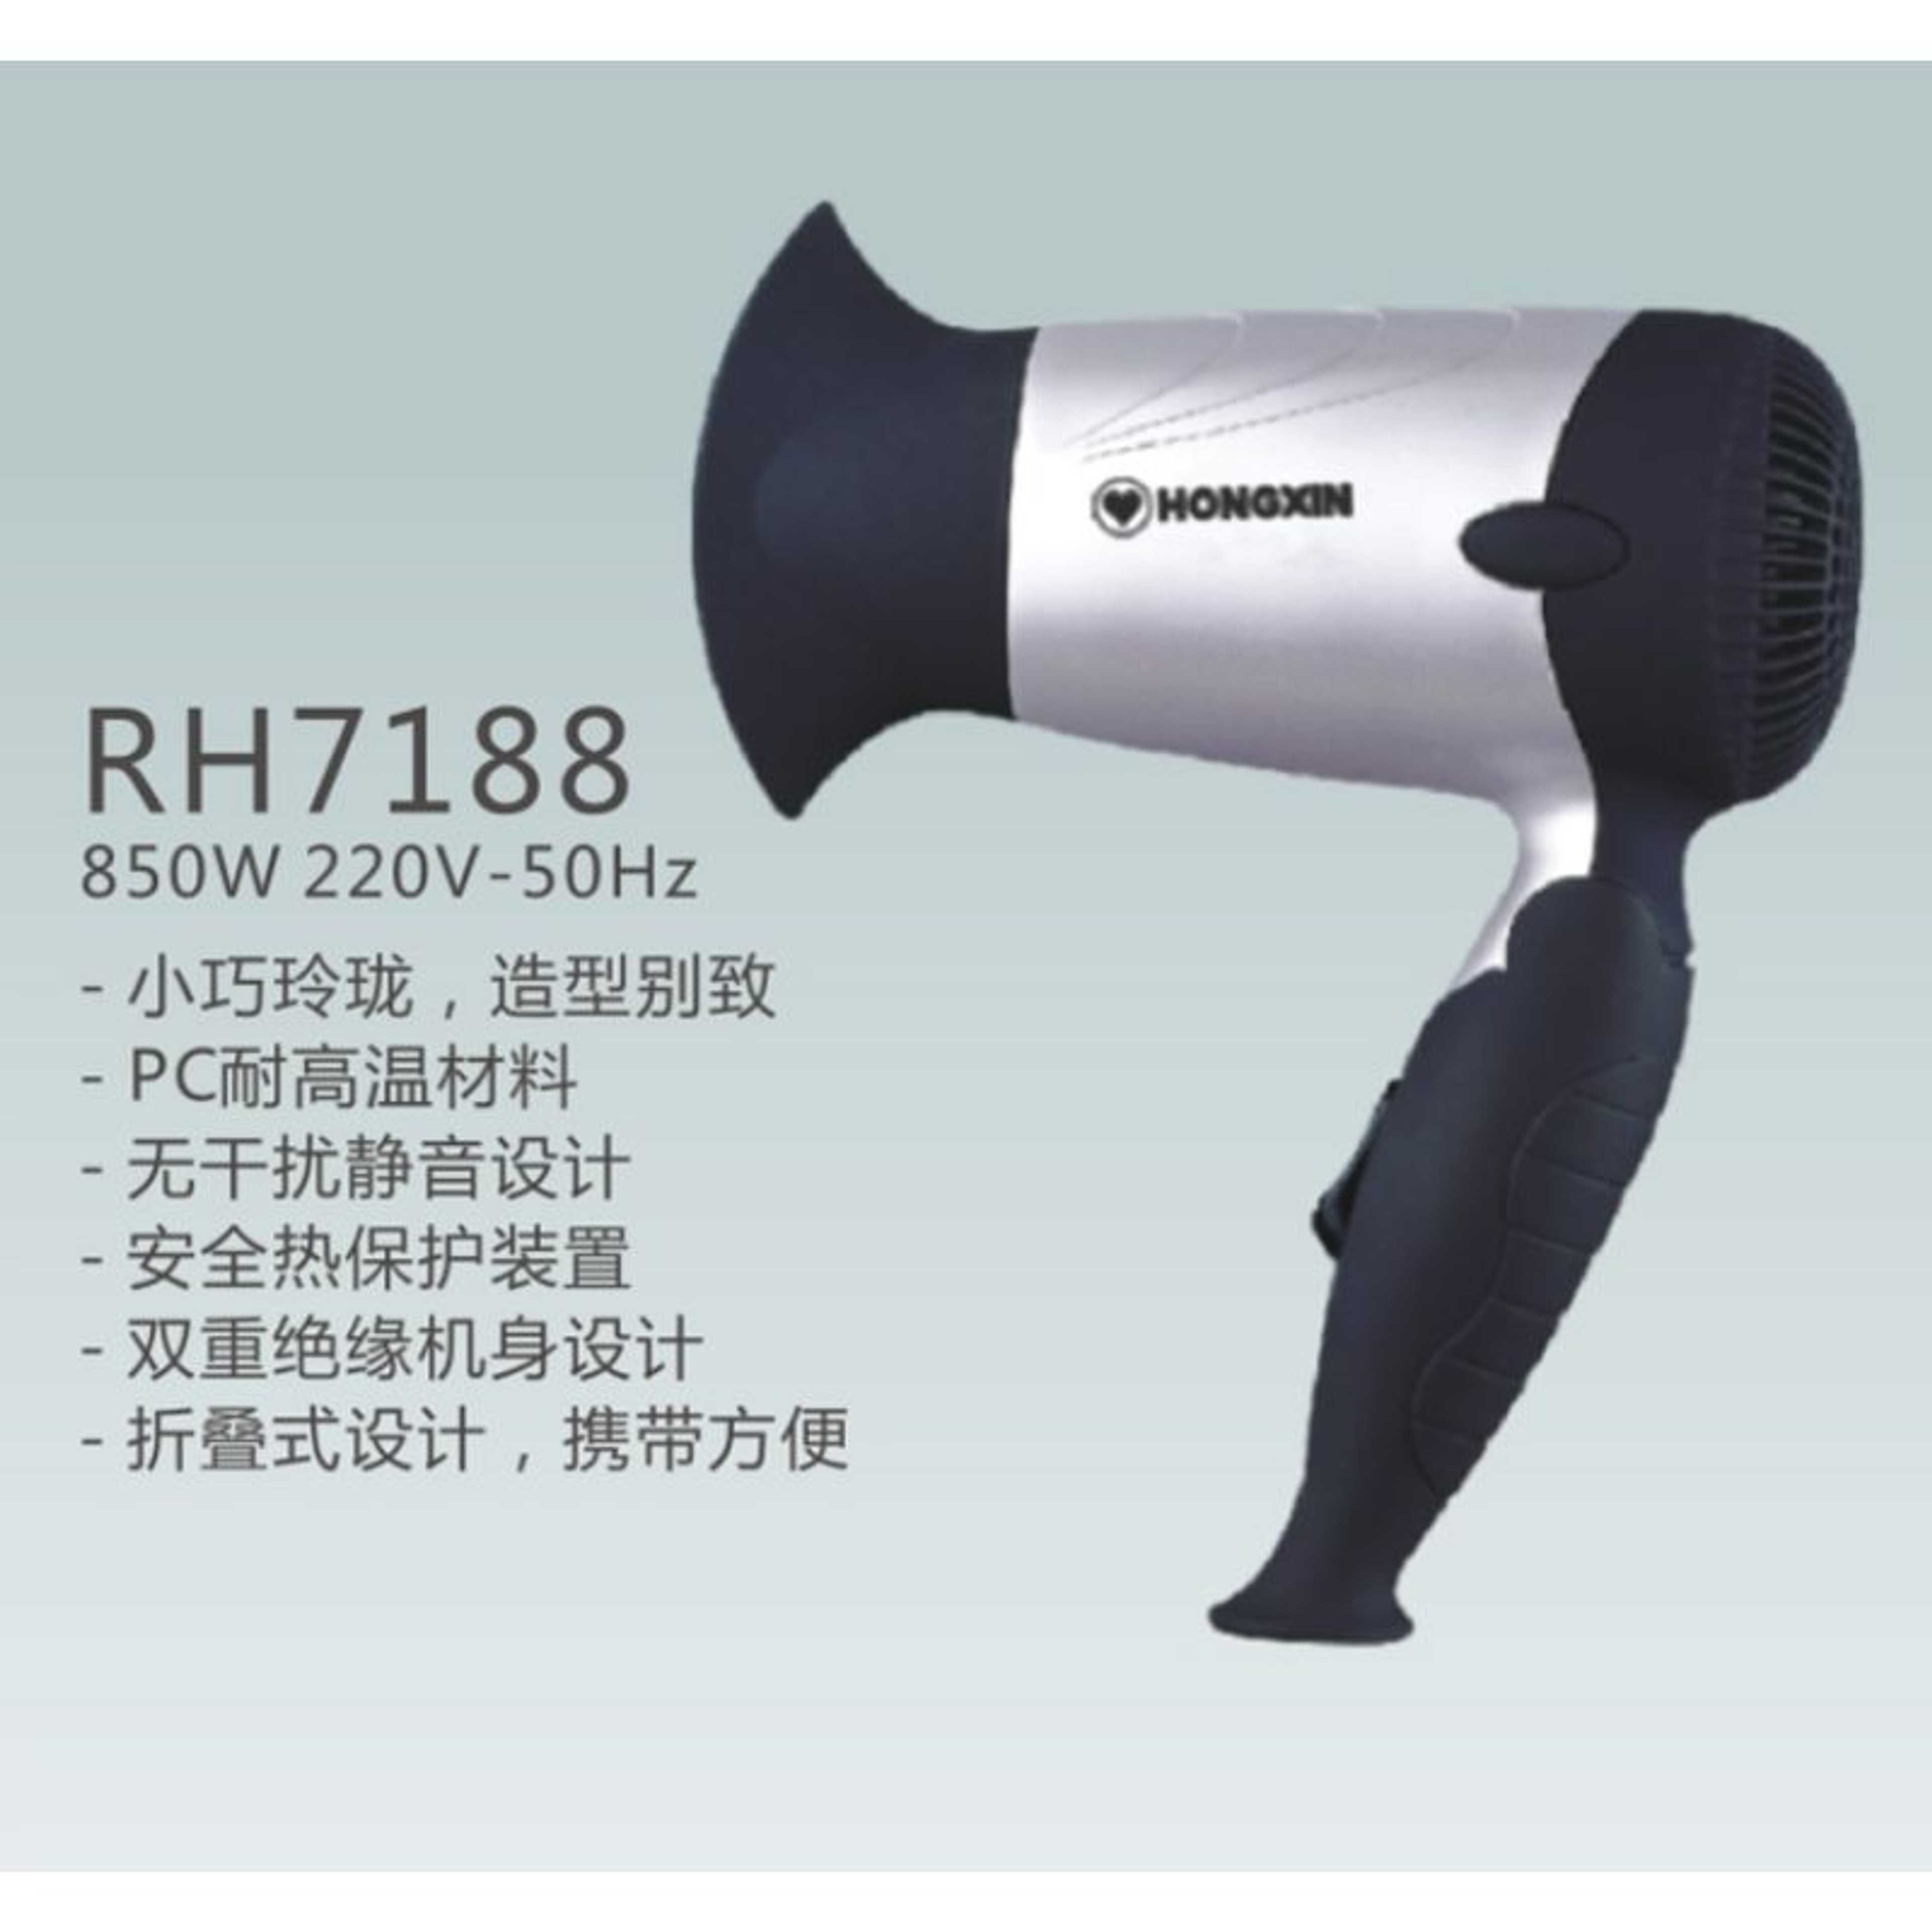 Nv-7400 Professional Hair foldable orignal dryer 4800 W Specially Designed for Women